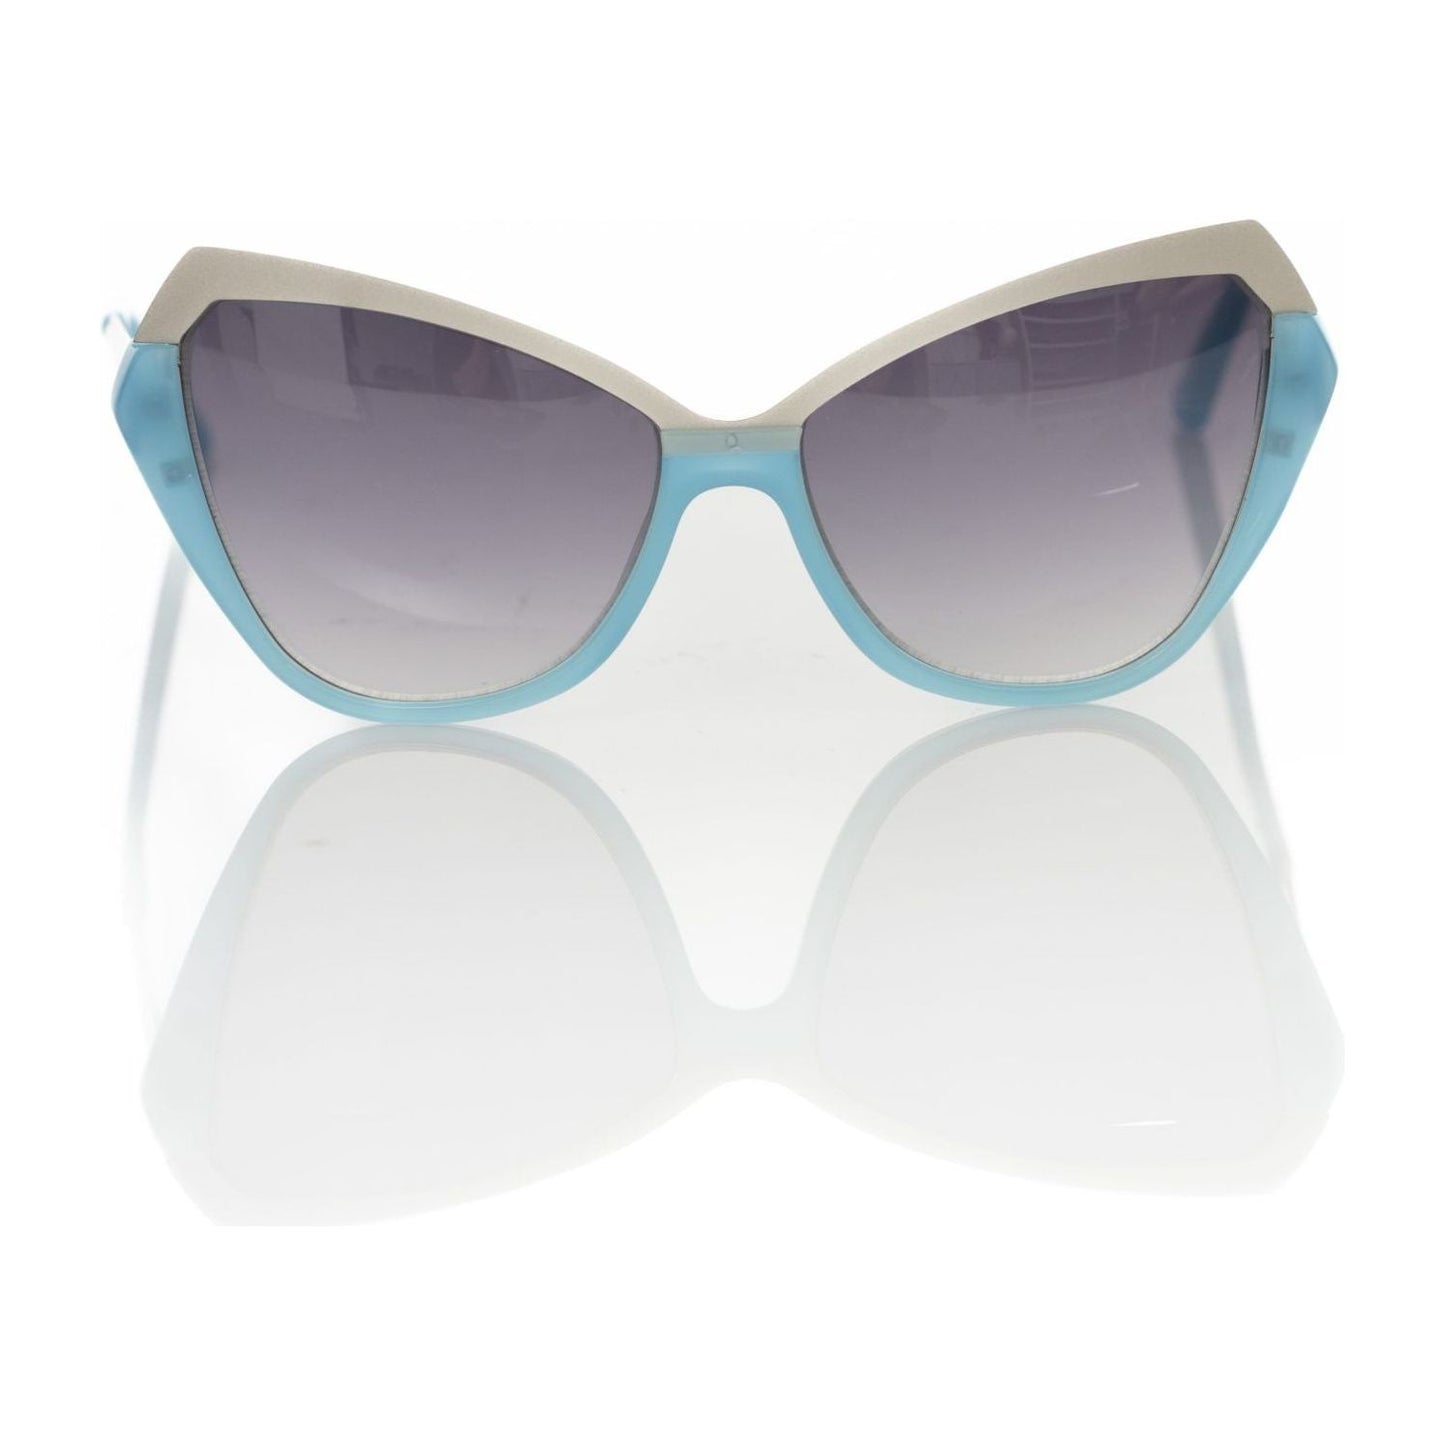 Chic Cat Eye Shades with Metallic Accent Frankie Morello